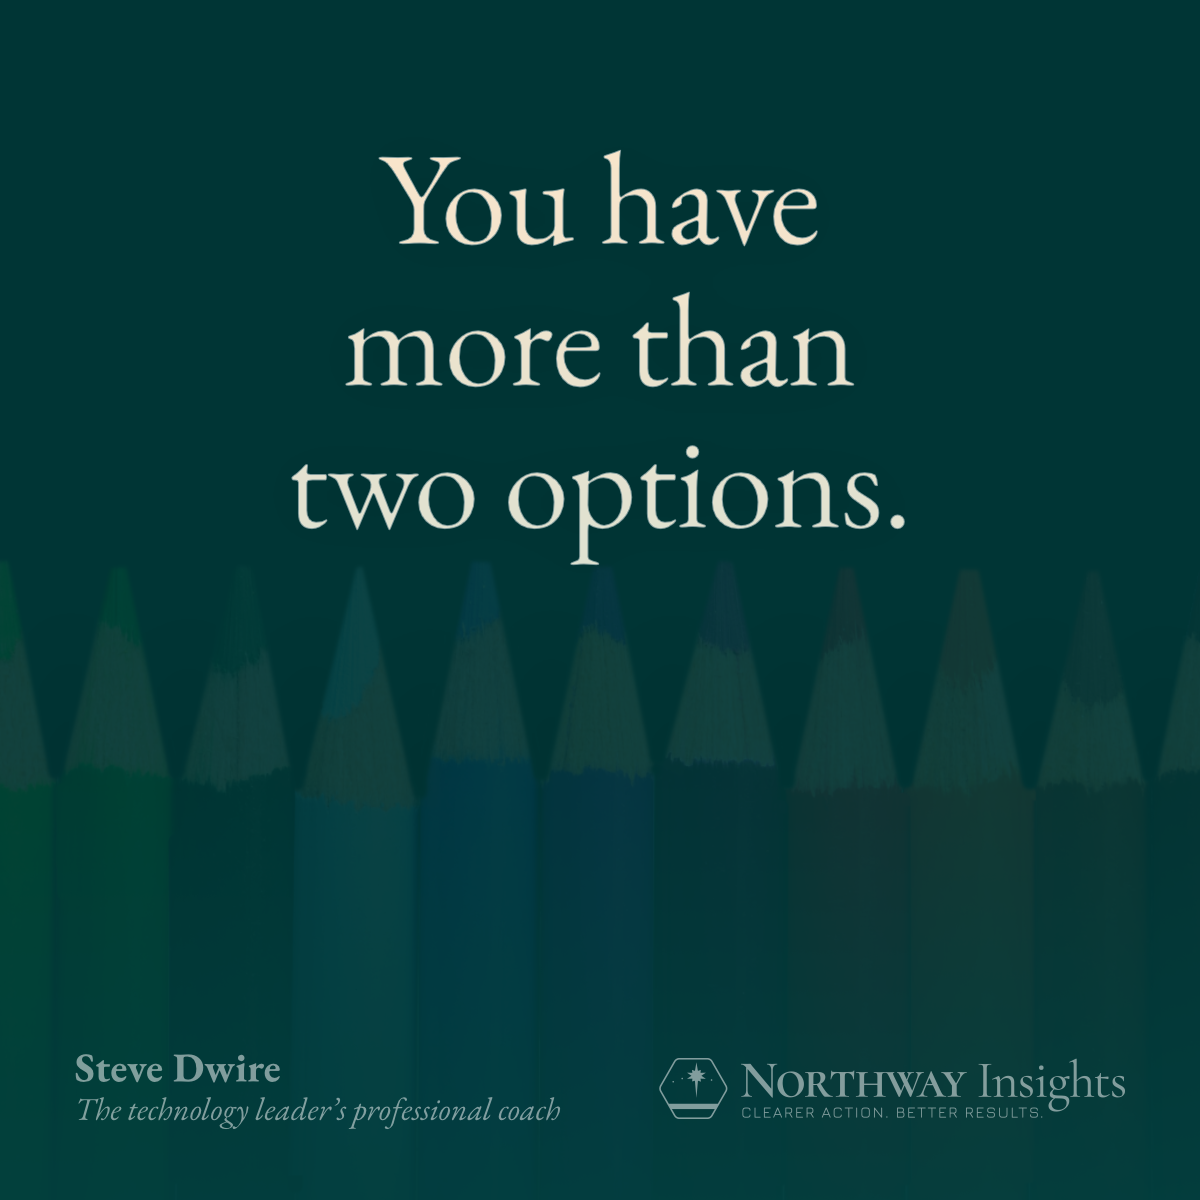 You have more than two options